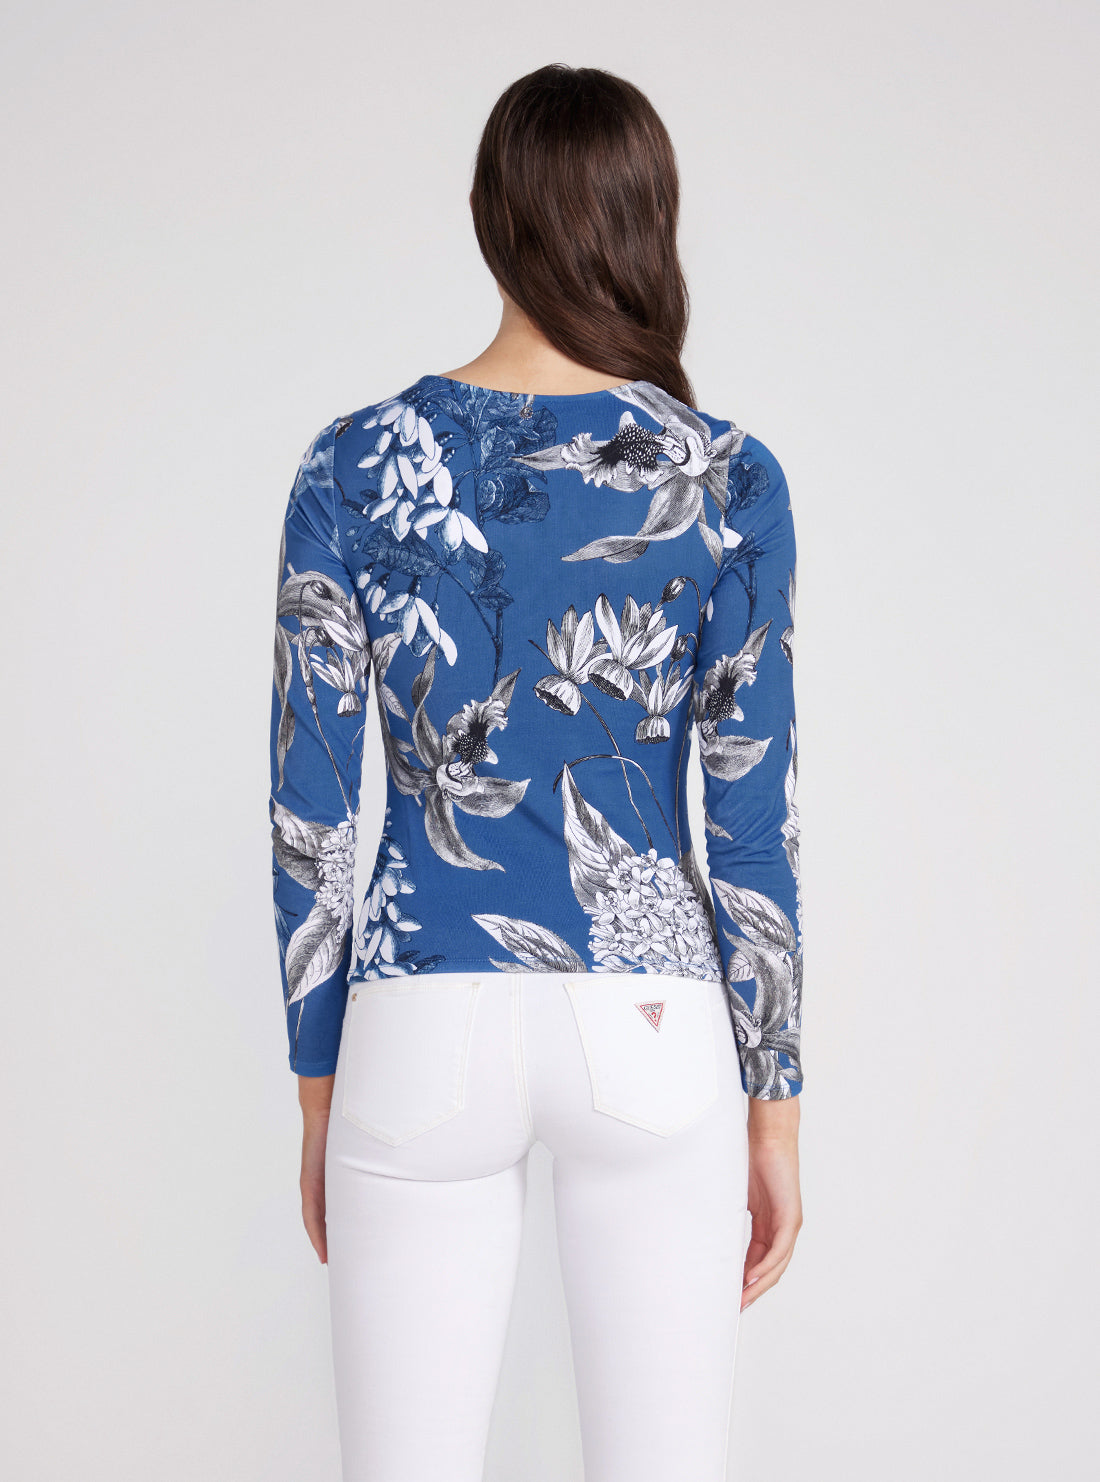 GUESS Blue Floral Print Dianna Long Sleeve Top back view